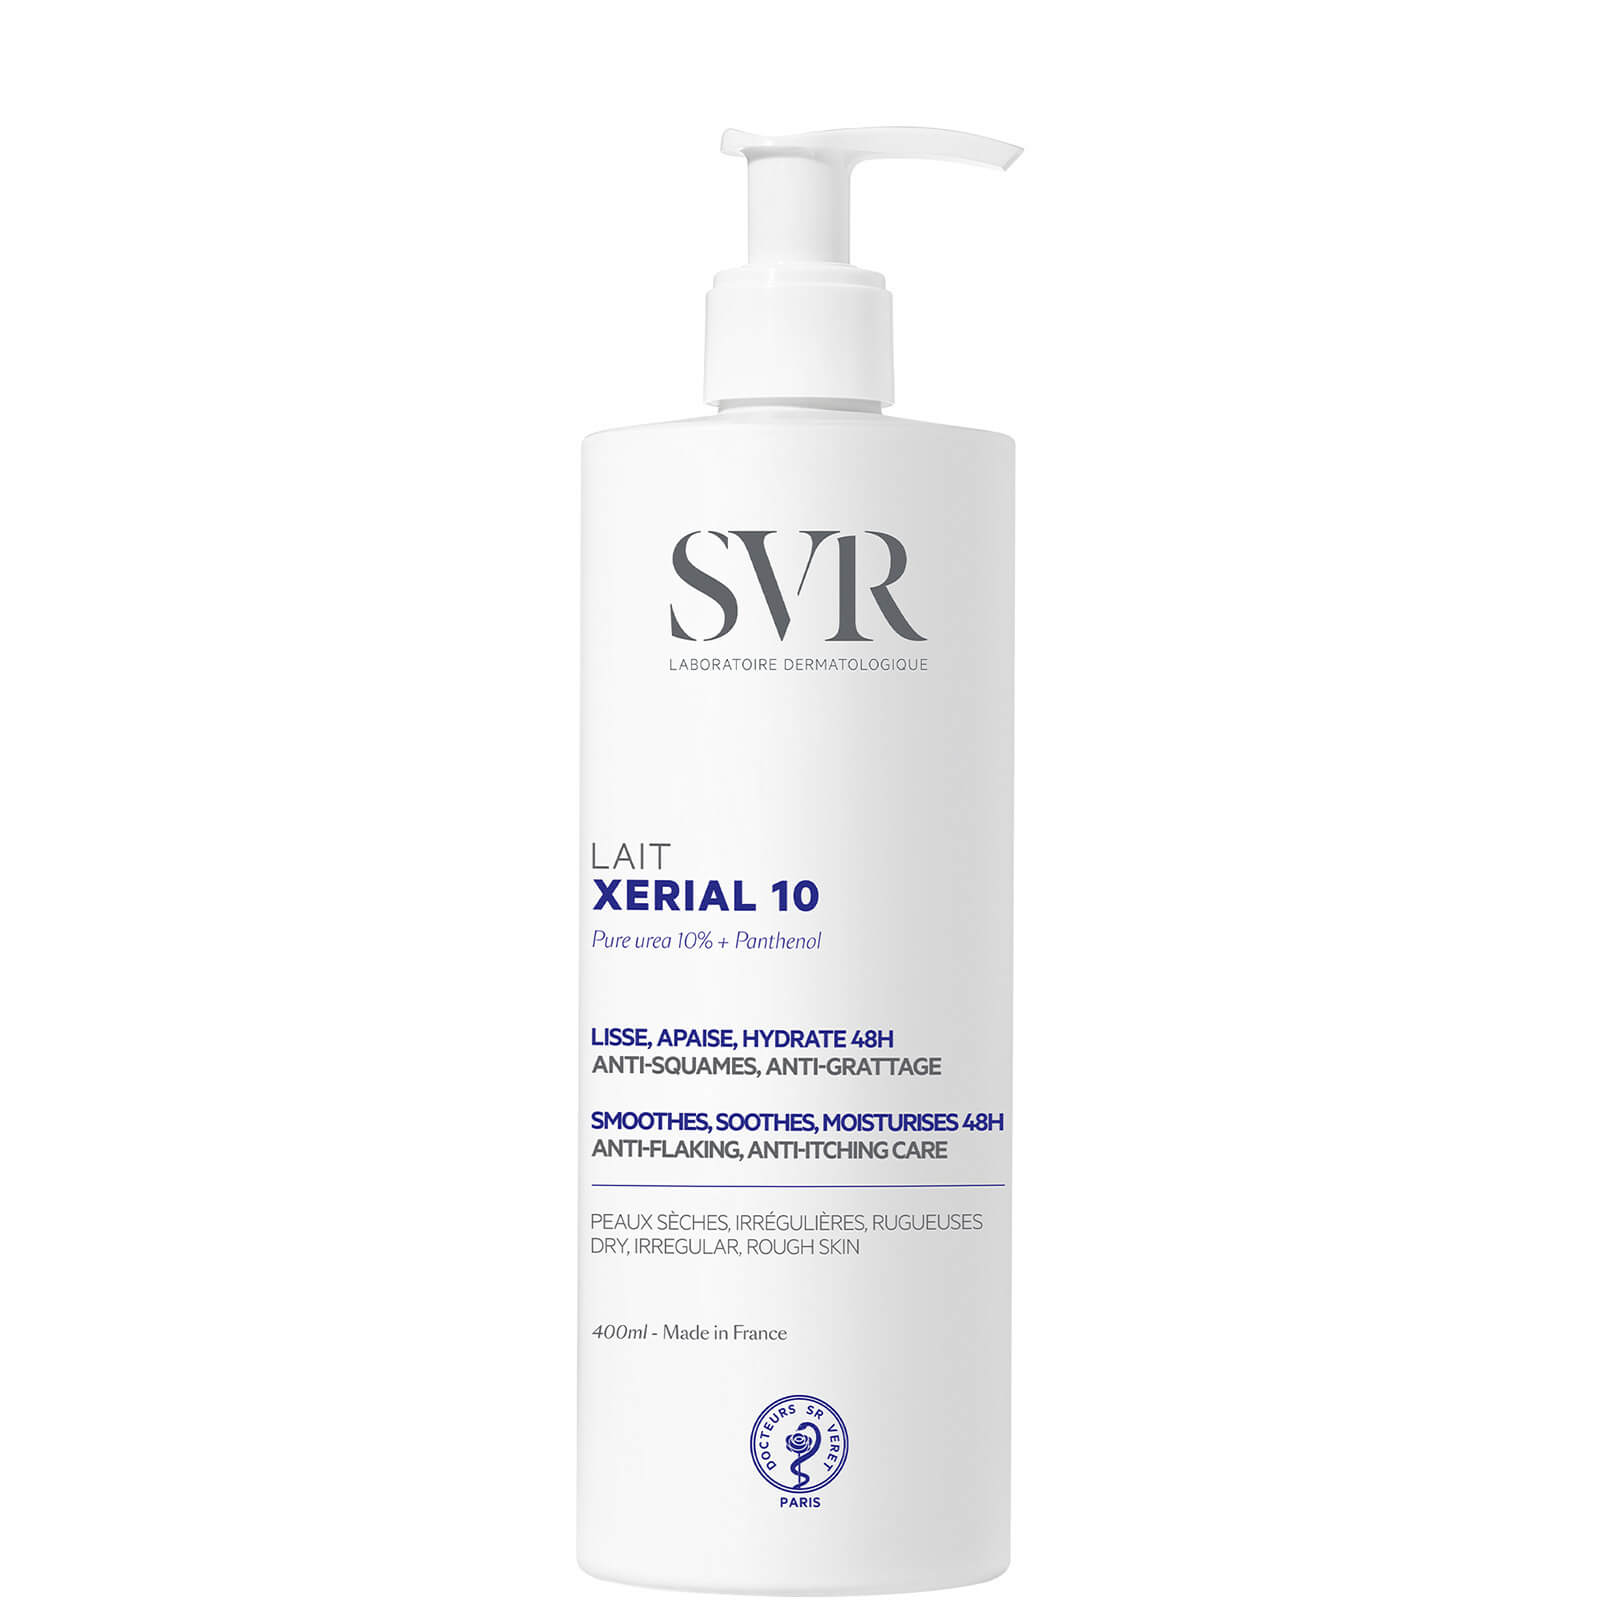 Photos - Cream / Lotion SVR Xerial 10 Rich Body Lotion for Flaky and Bumpy Skin 400ml 1001247 